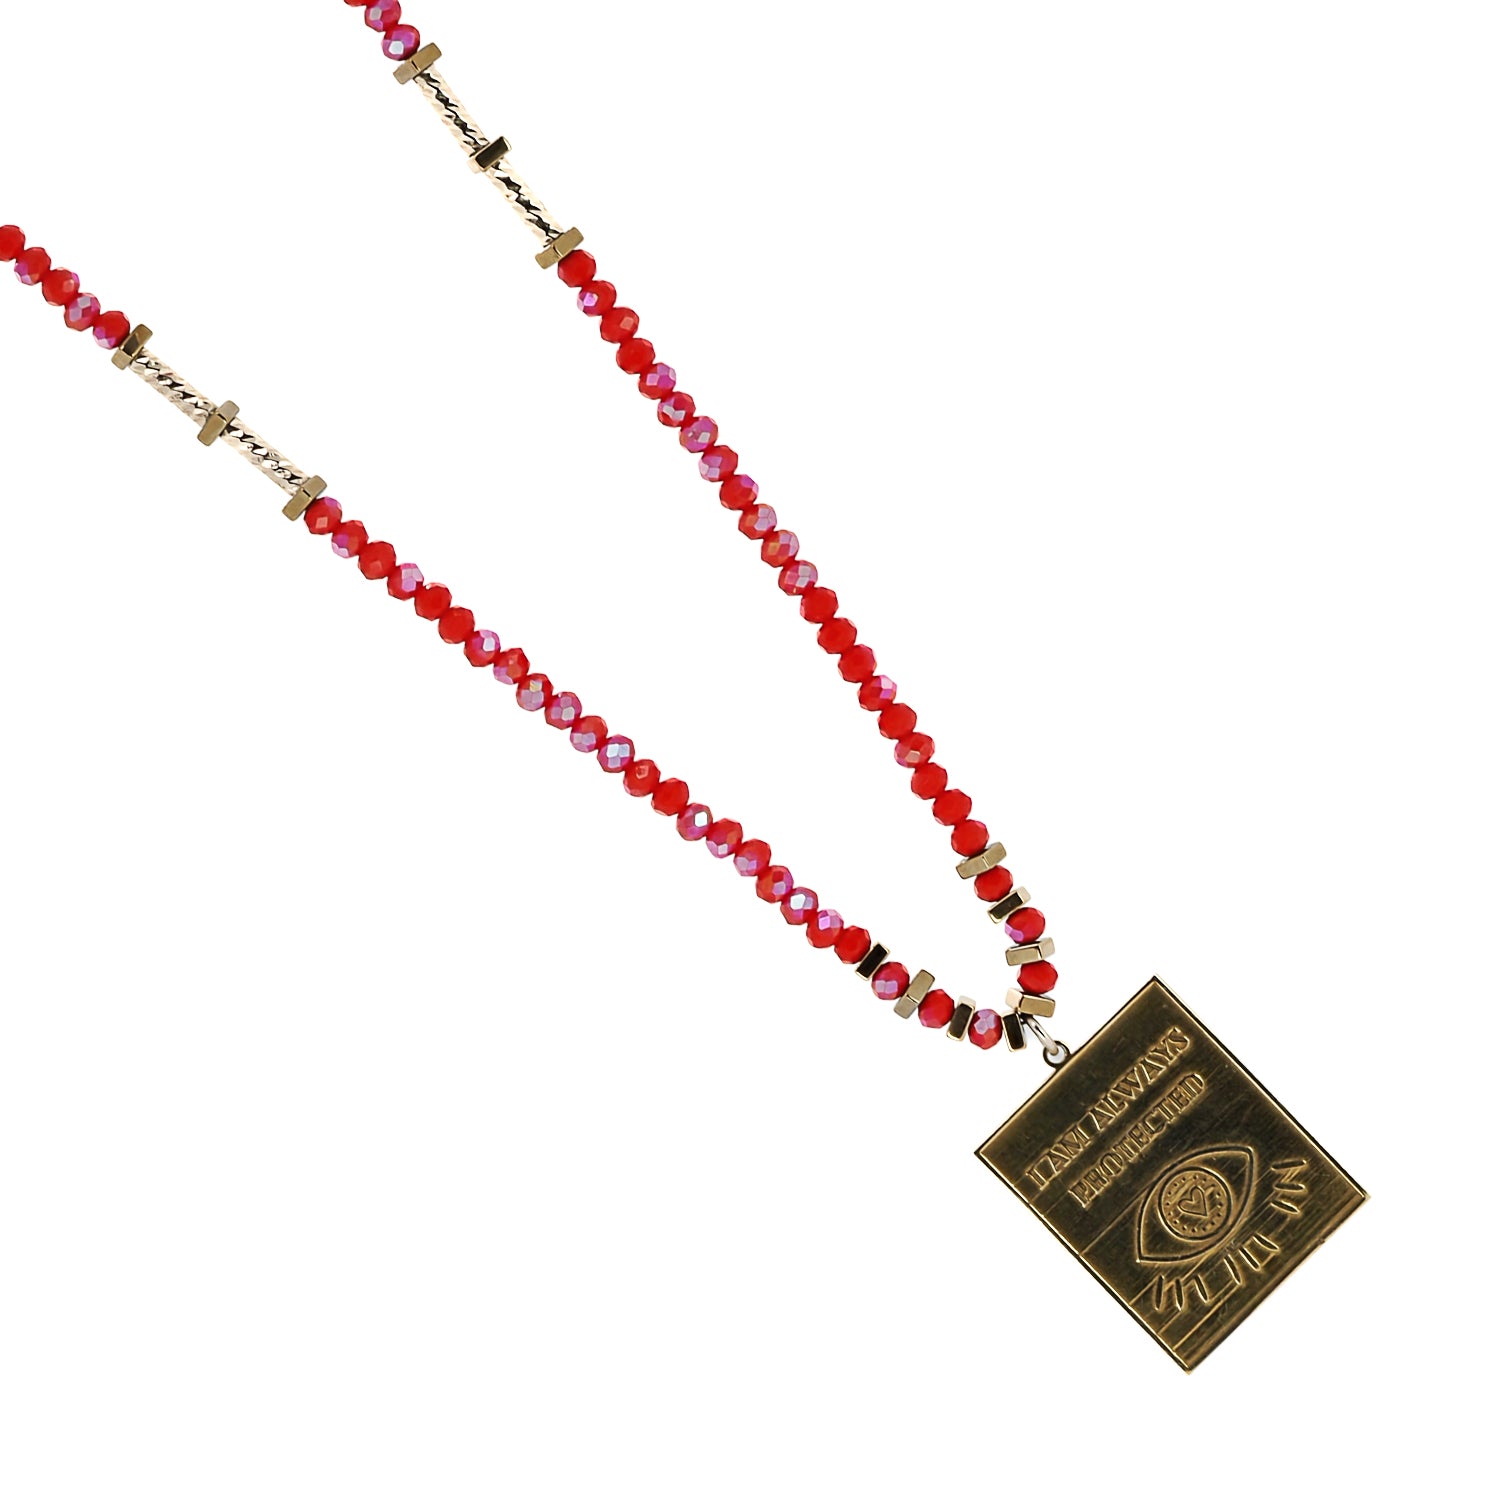 "Gold will protect you" - Reinforcing the Necklace's Purpose.